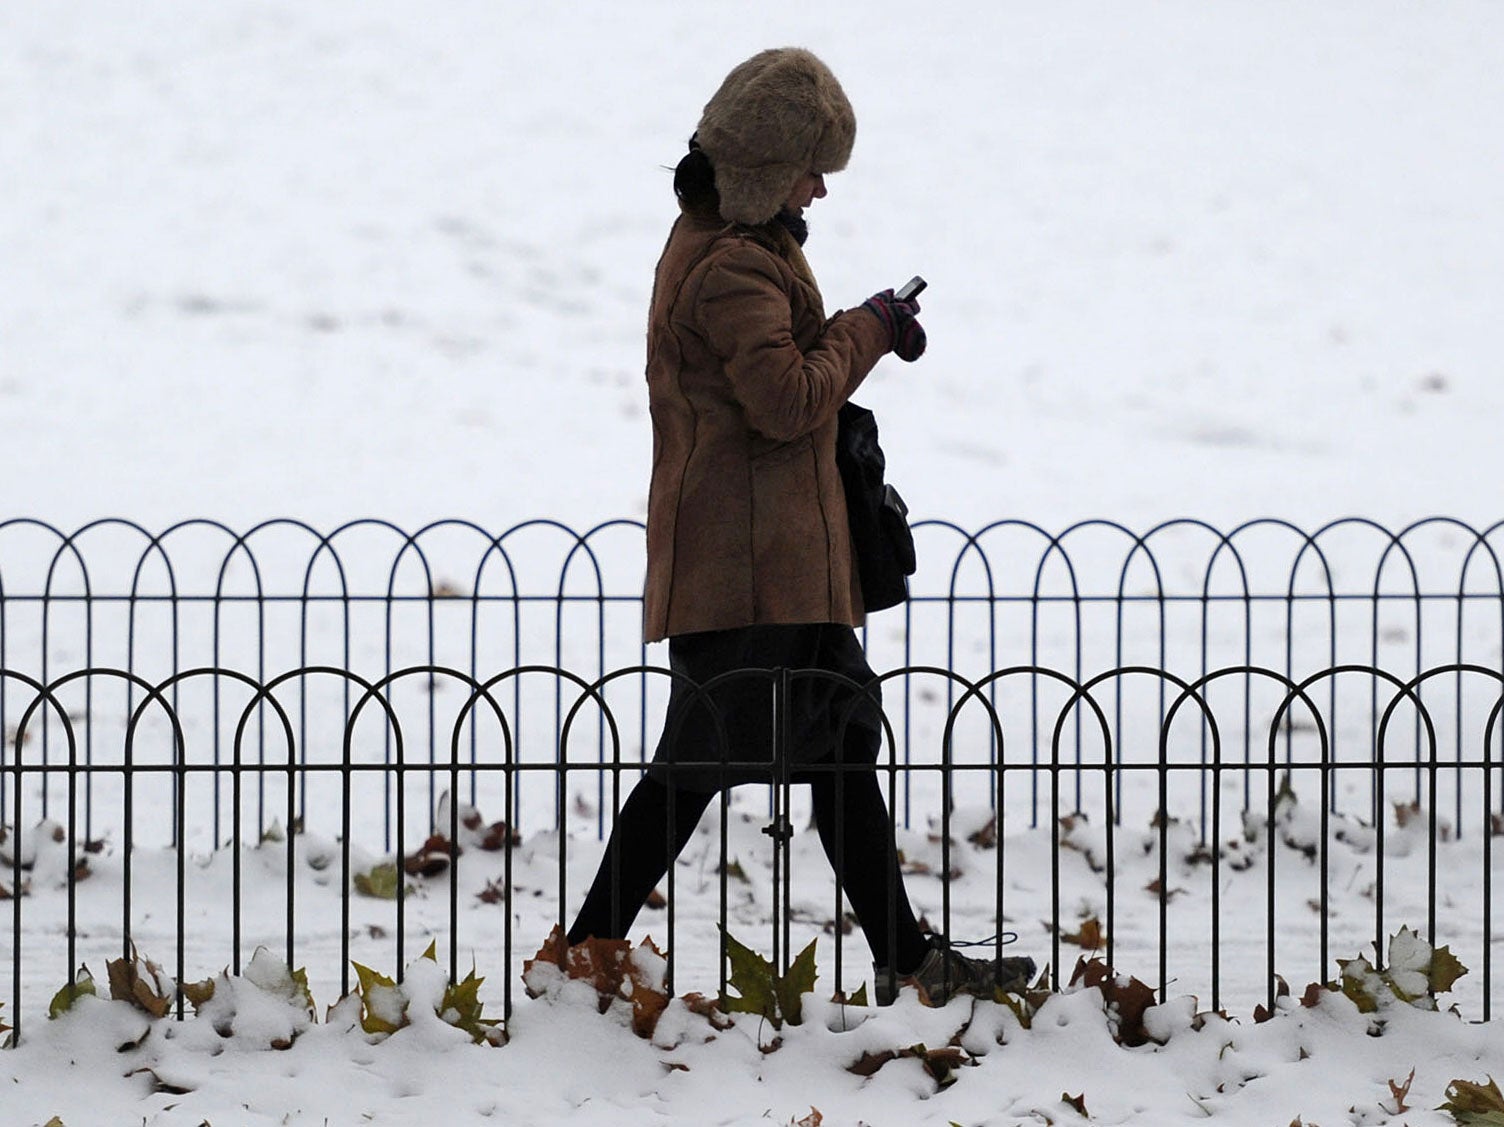 A woman uses her phone as she walks through a snowy St James's Park in London